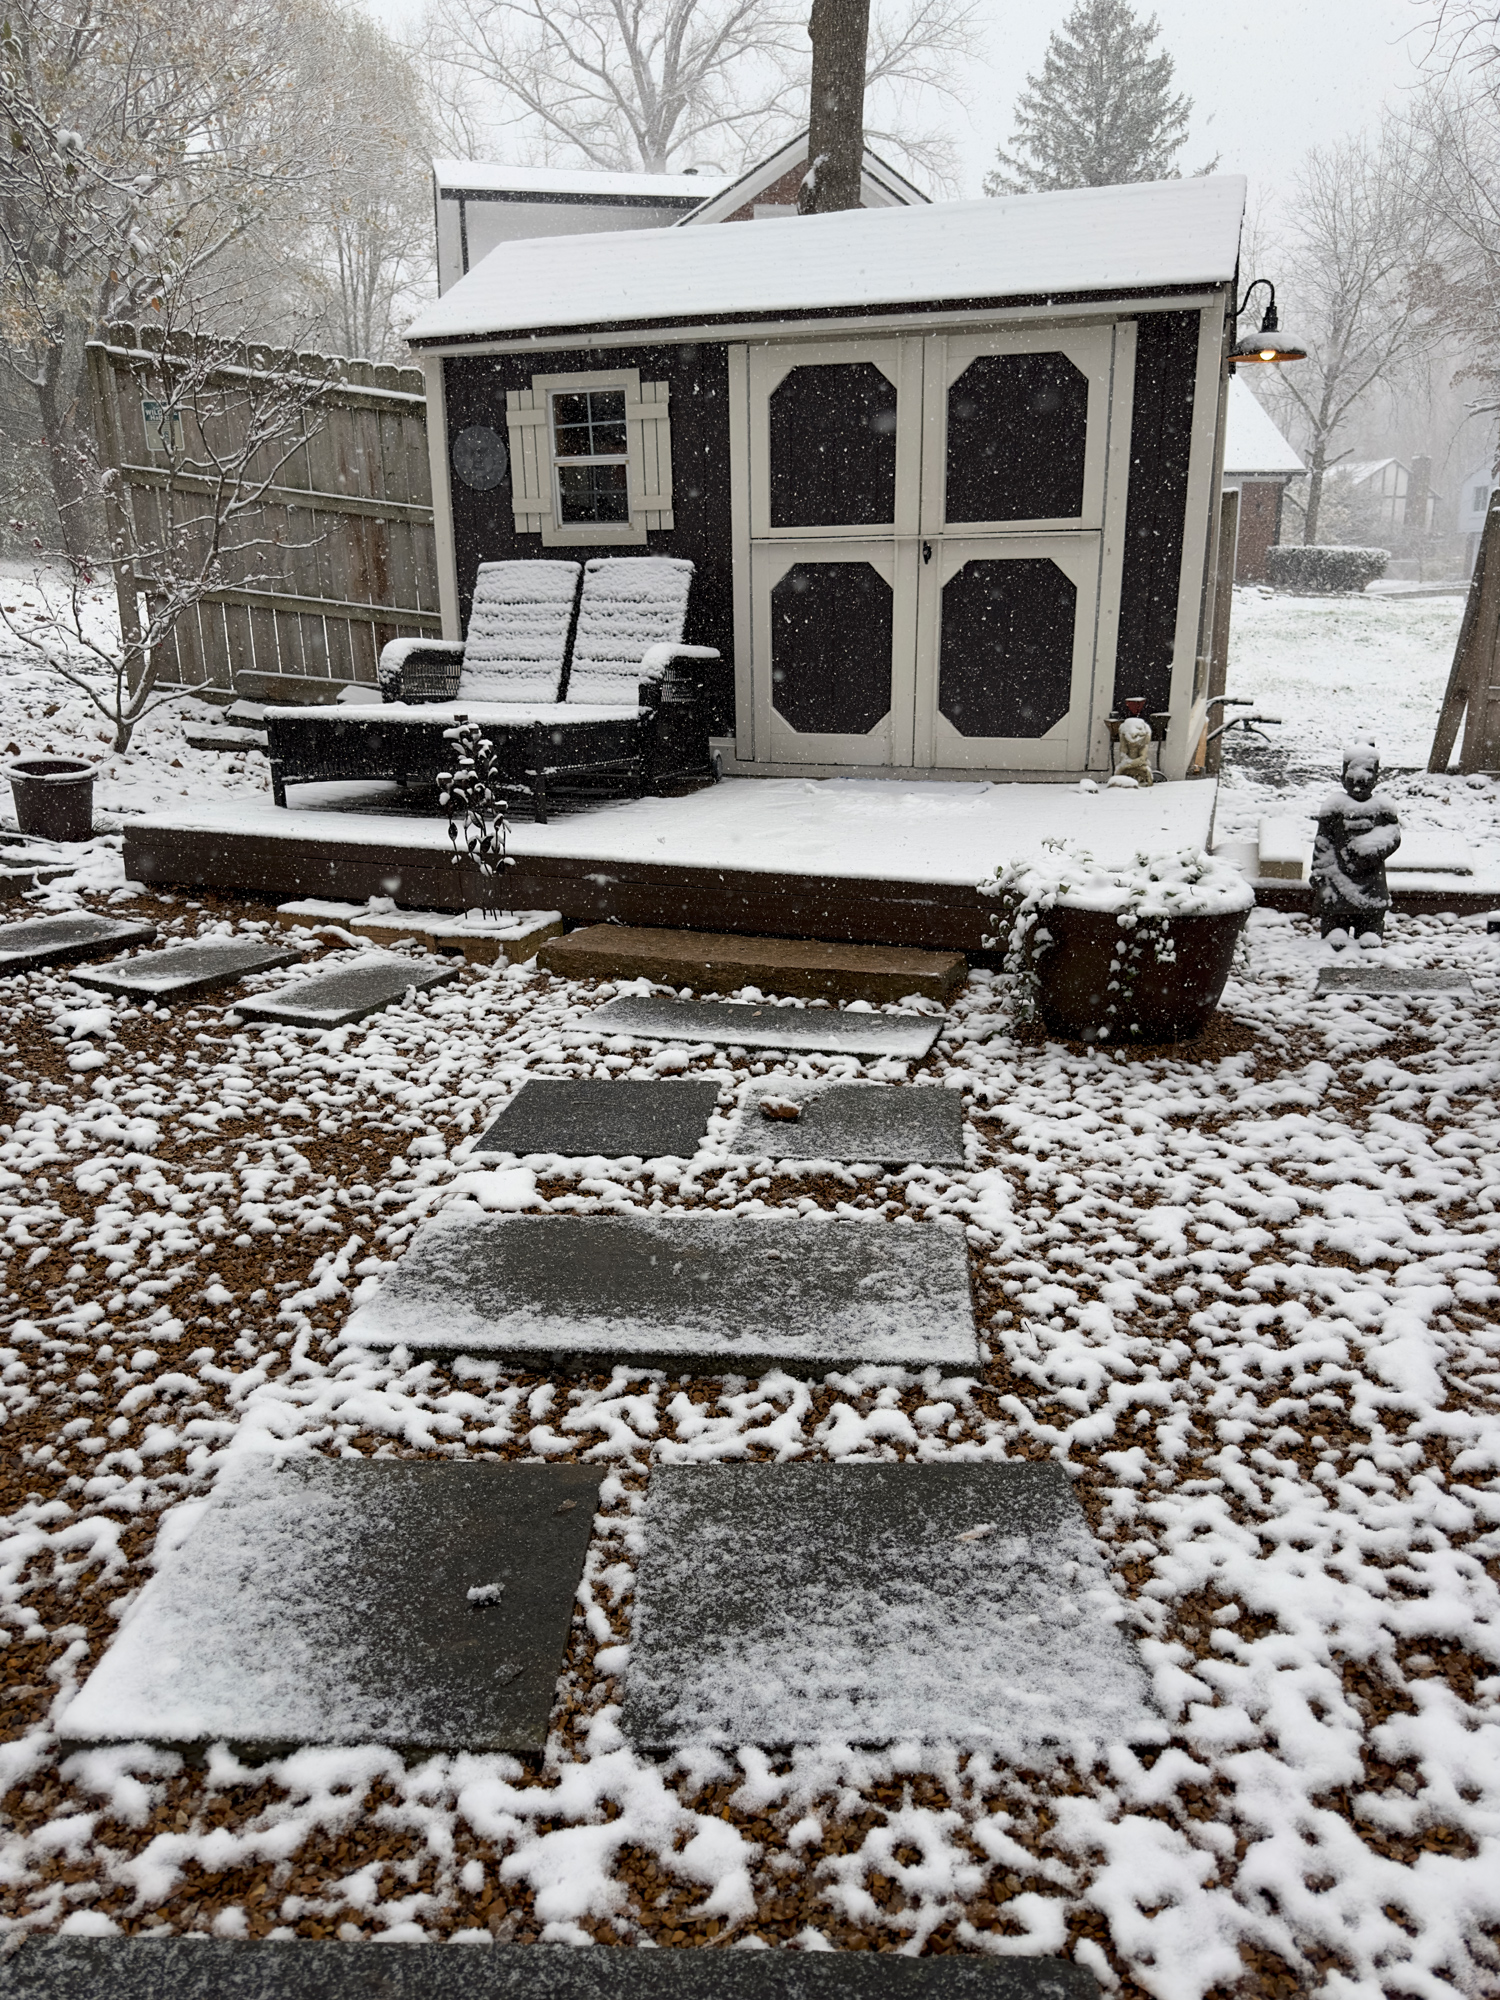 Our renovated entertainment shack in a recent snowstorm